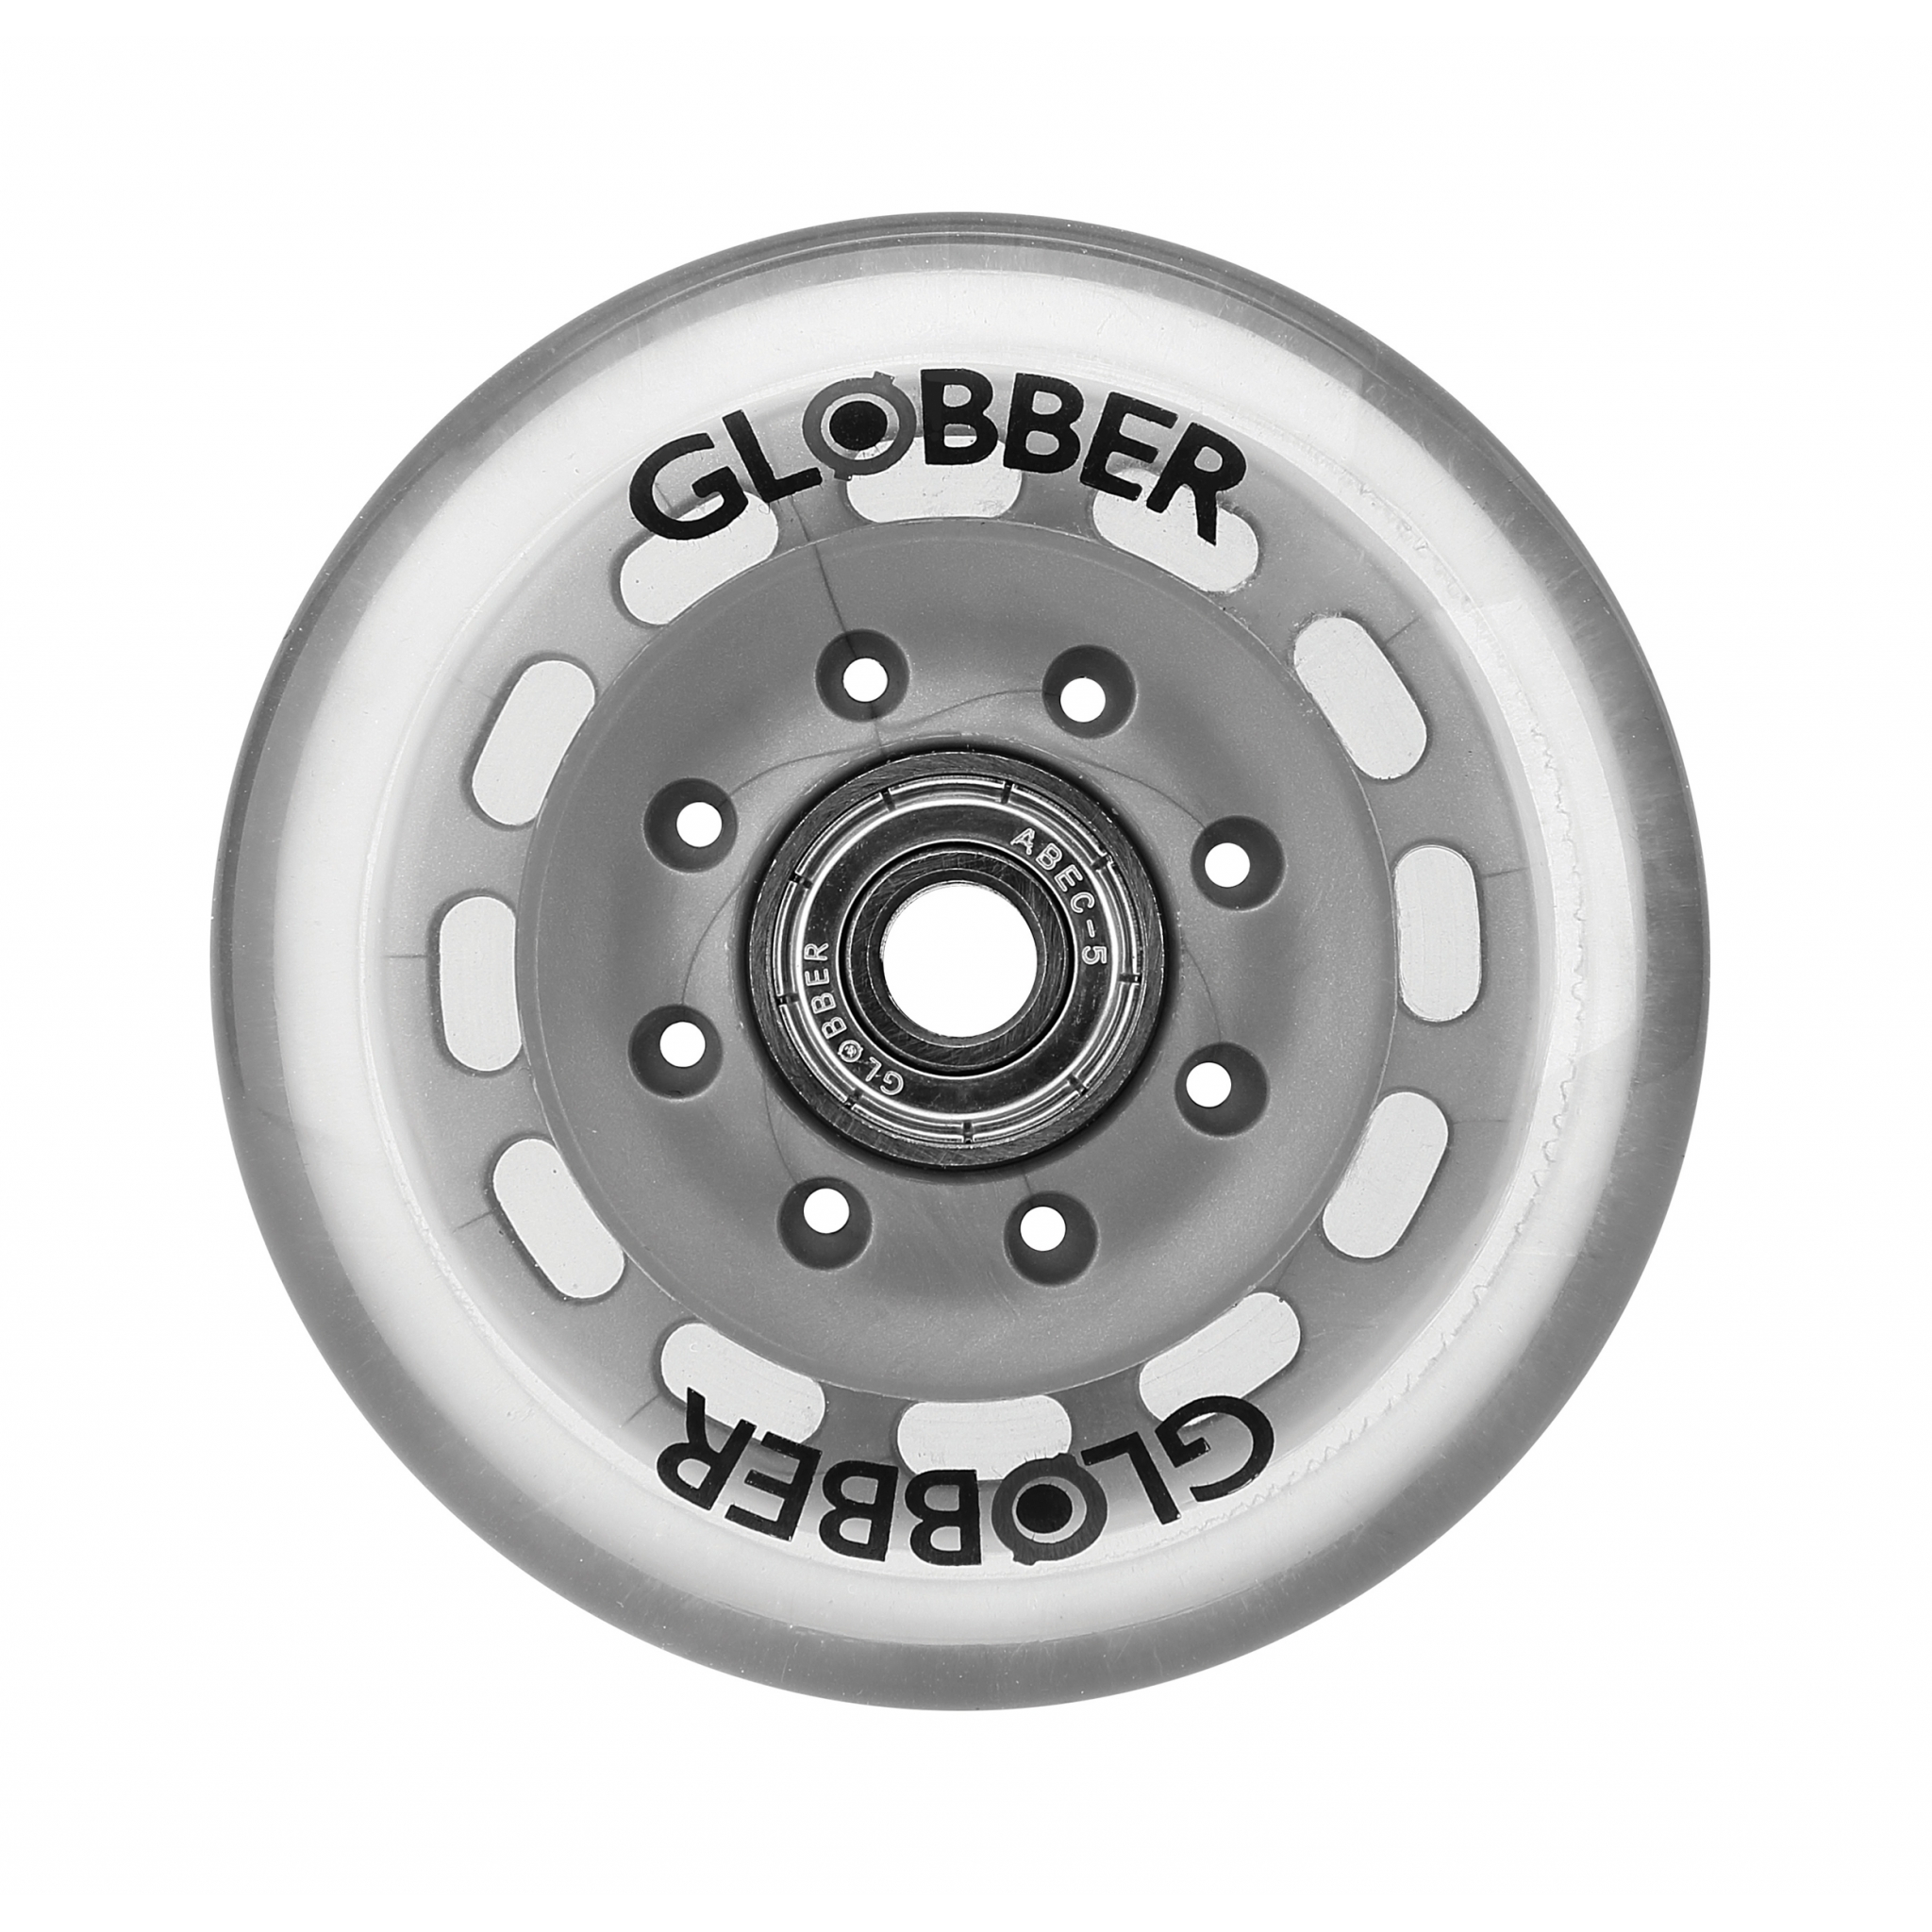 scooter rear wheel for Globber PRIMO and GO-UP scooters 0